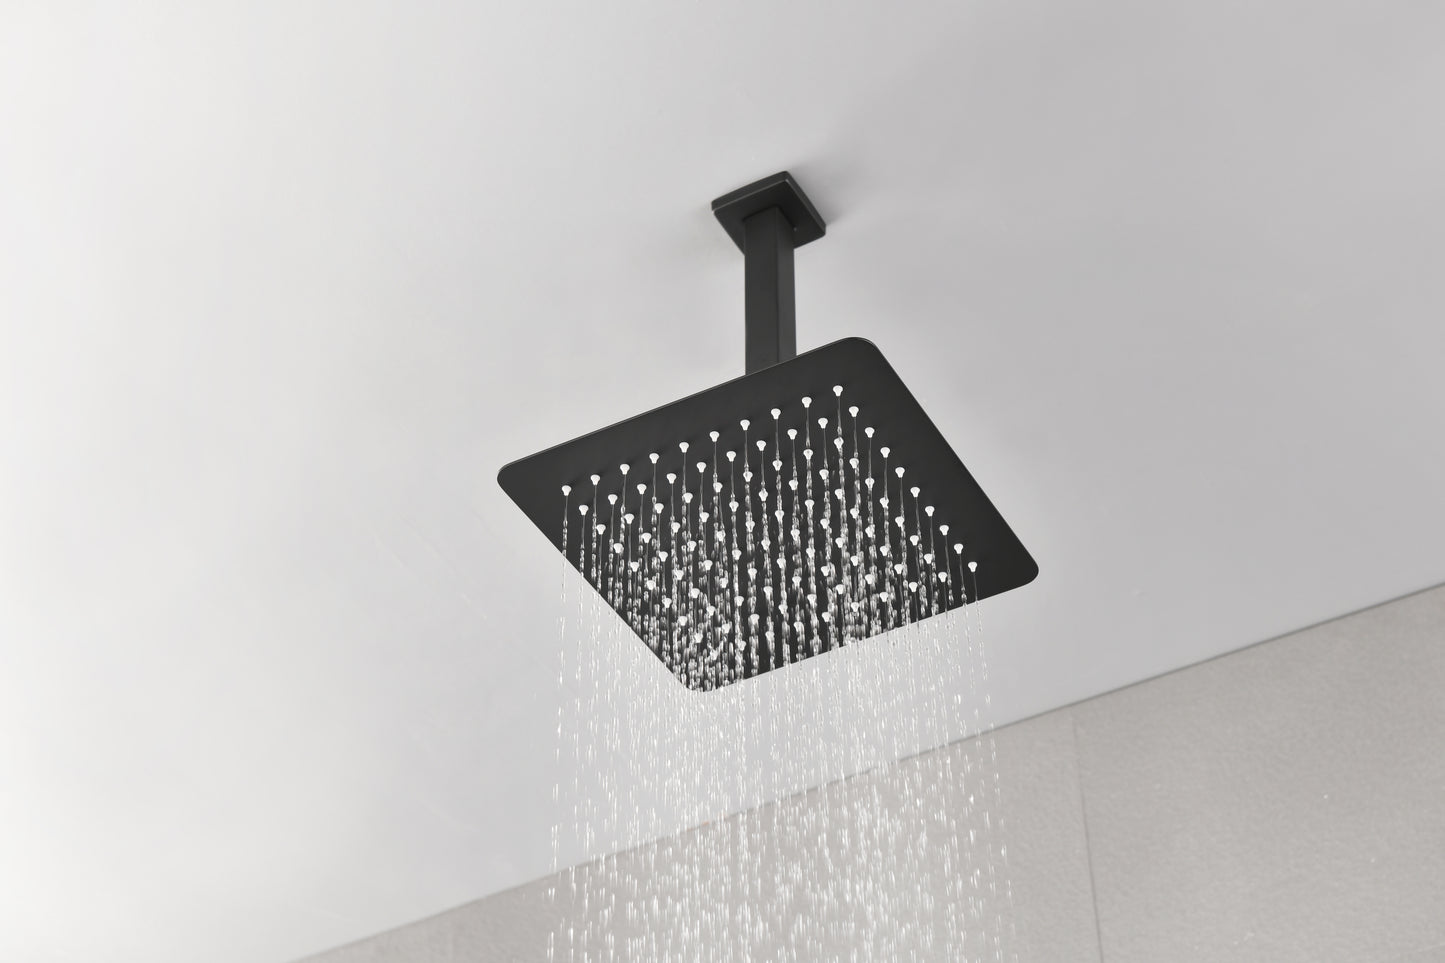 SHOWER Shower Head With Shower Arm,  Ceiling Mount Square Shower Head, Stainless Steel Ceiling Rainfall Showerhead- Waterfall Full Body Coverage